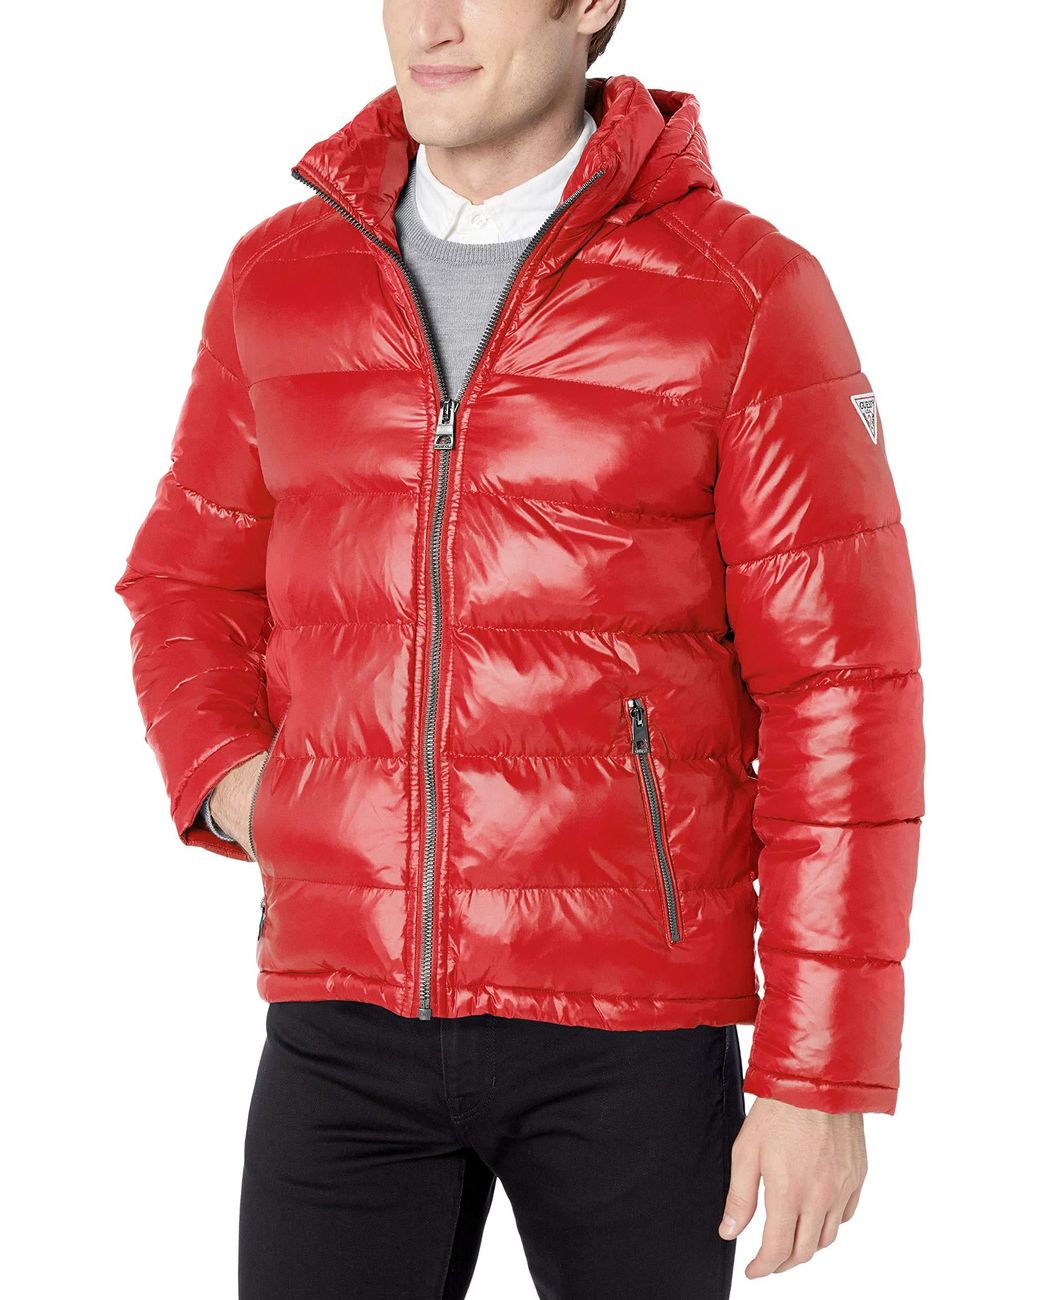 Guess Mid Weight Puffer Jacket in Red for Men - Save 13% - Lyst